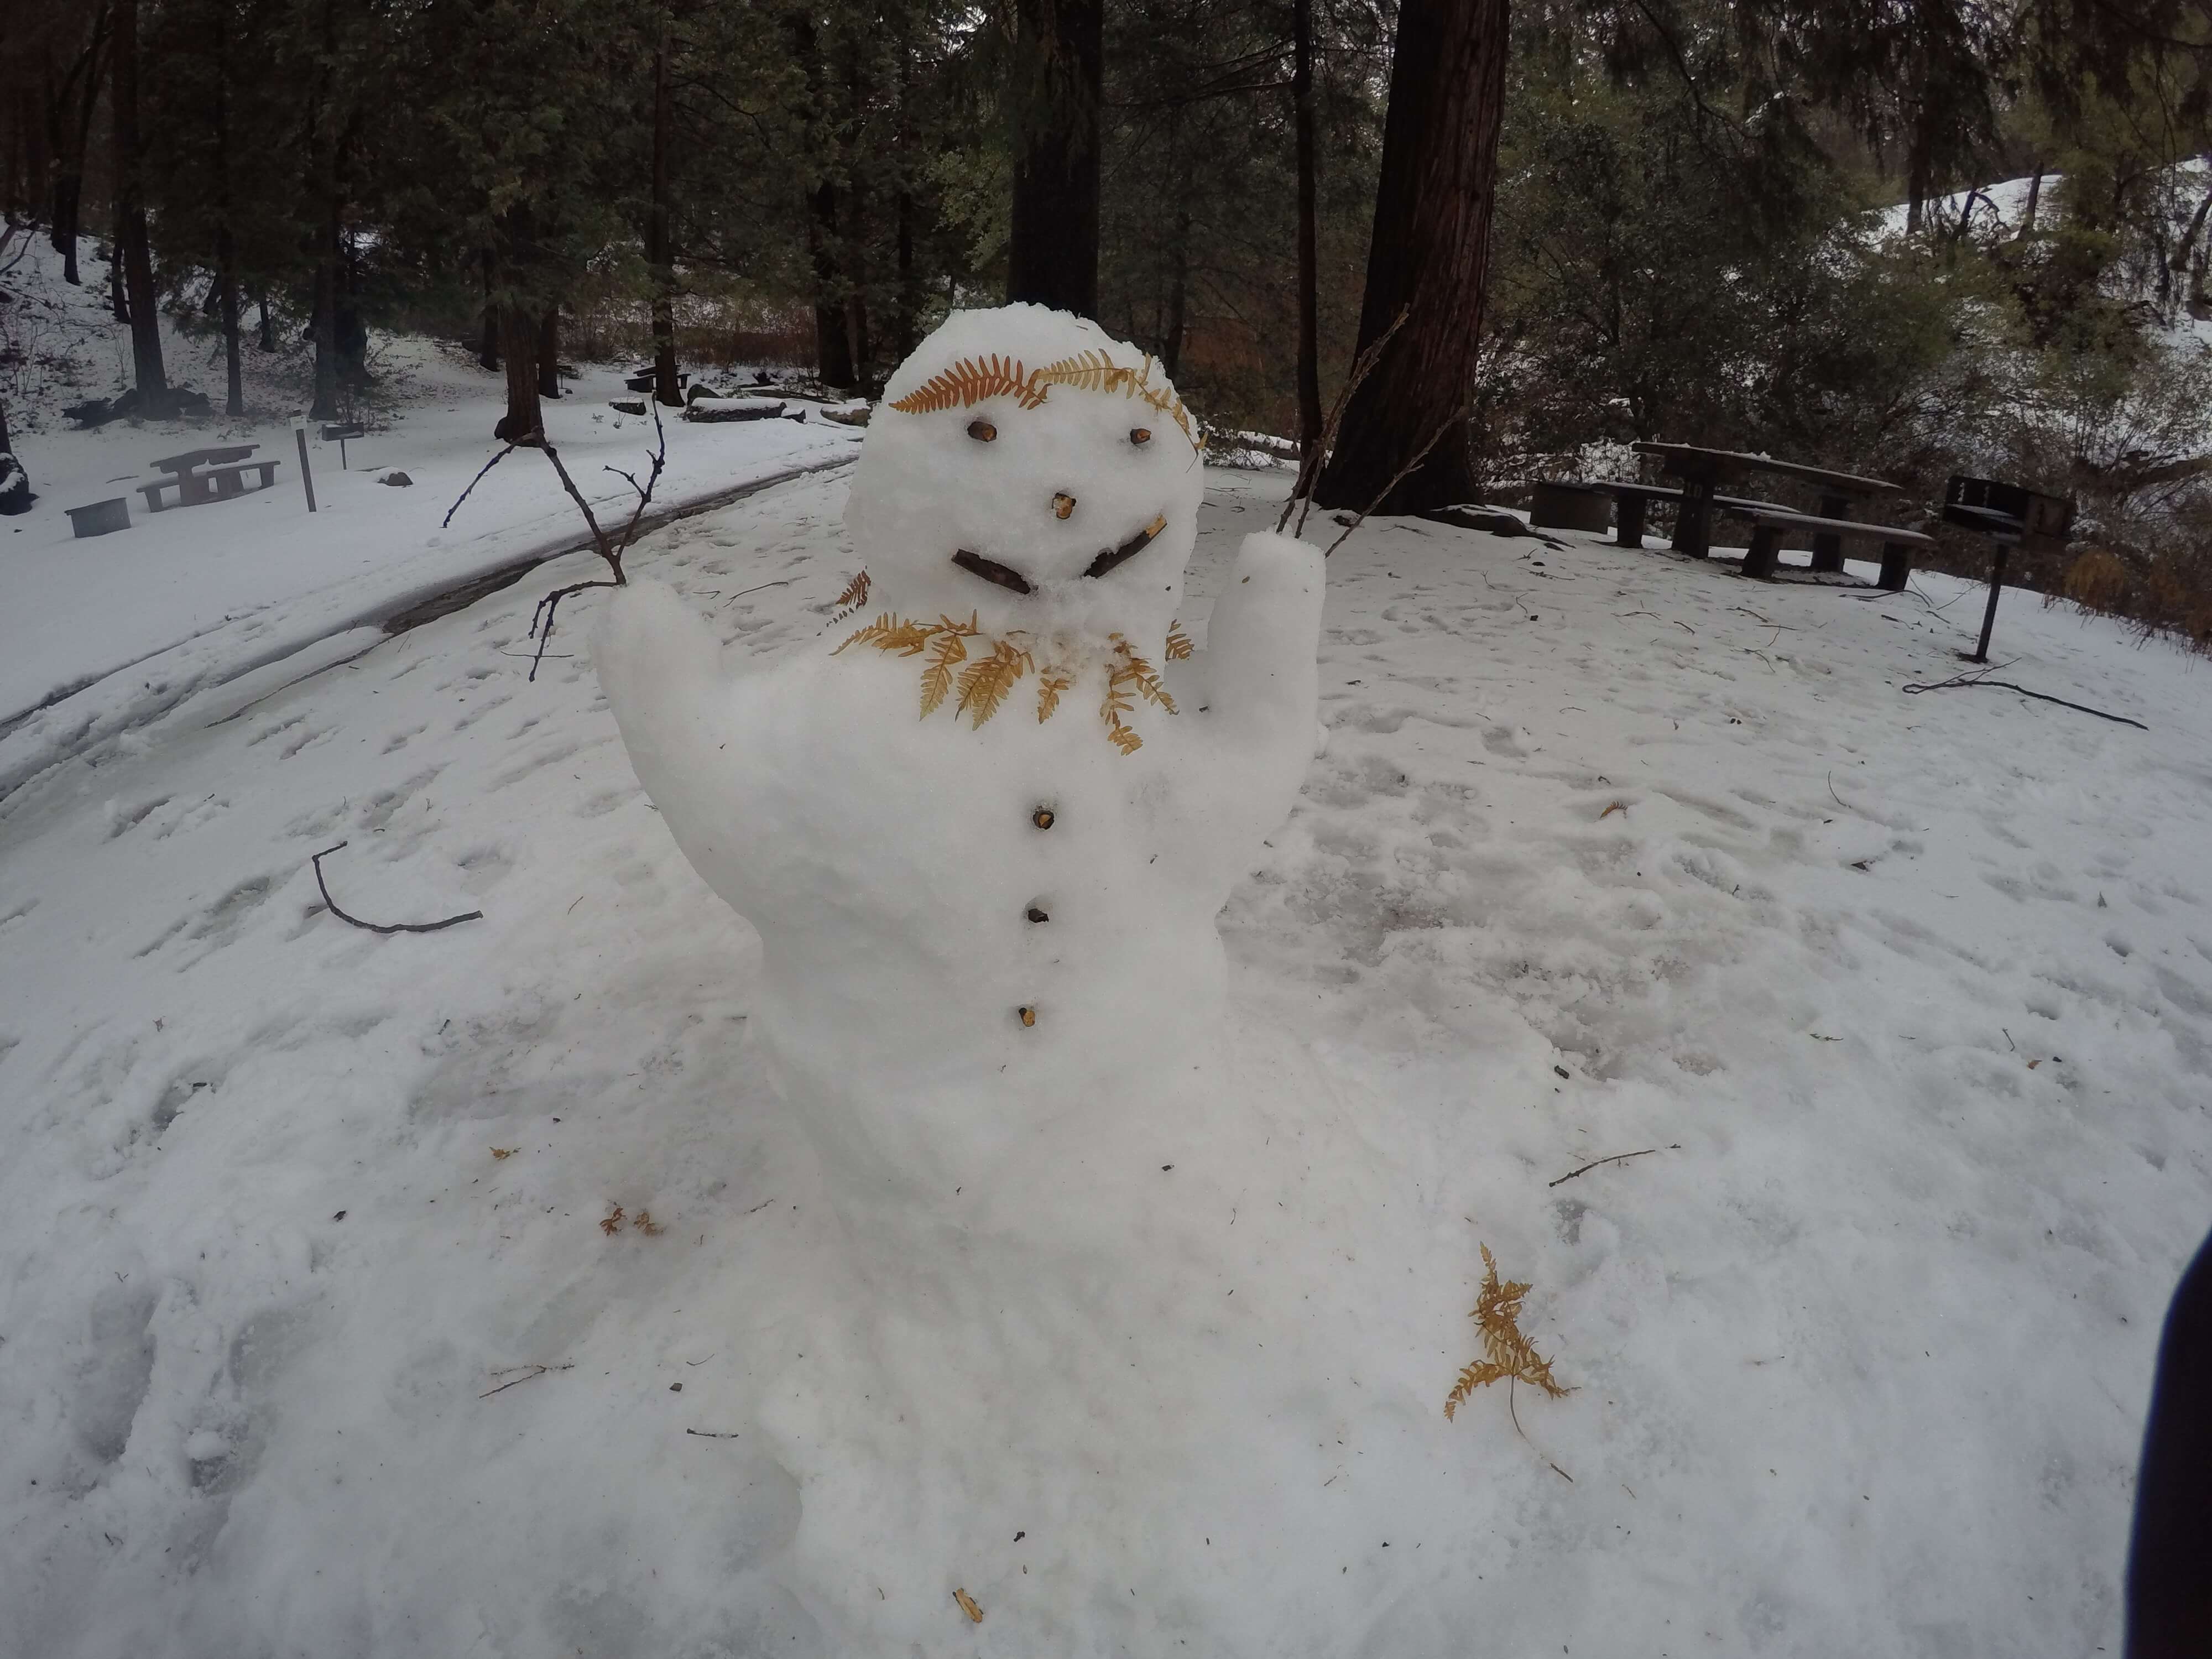 Snowman in Fry Creek Campground Palomar Mountain, CA